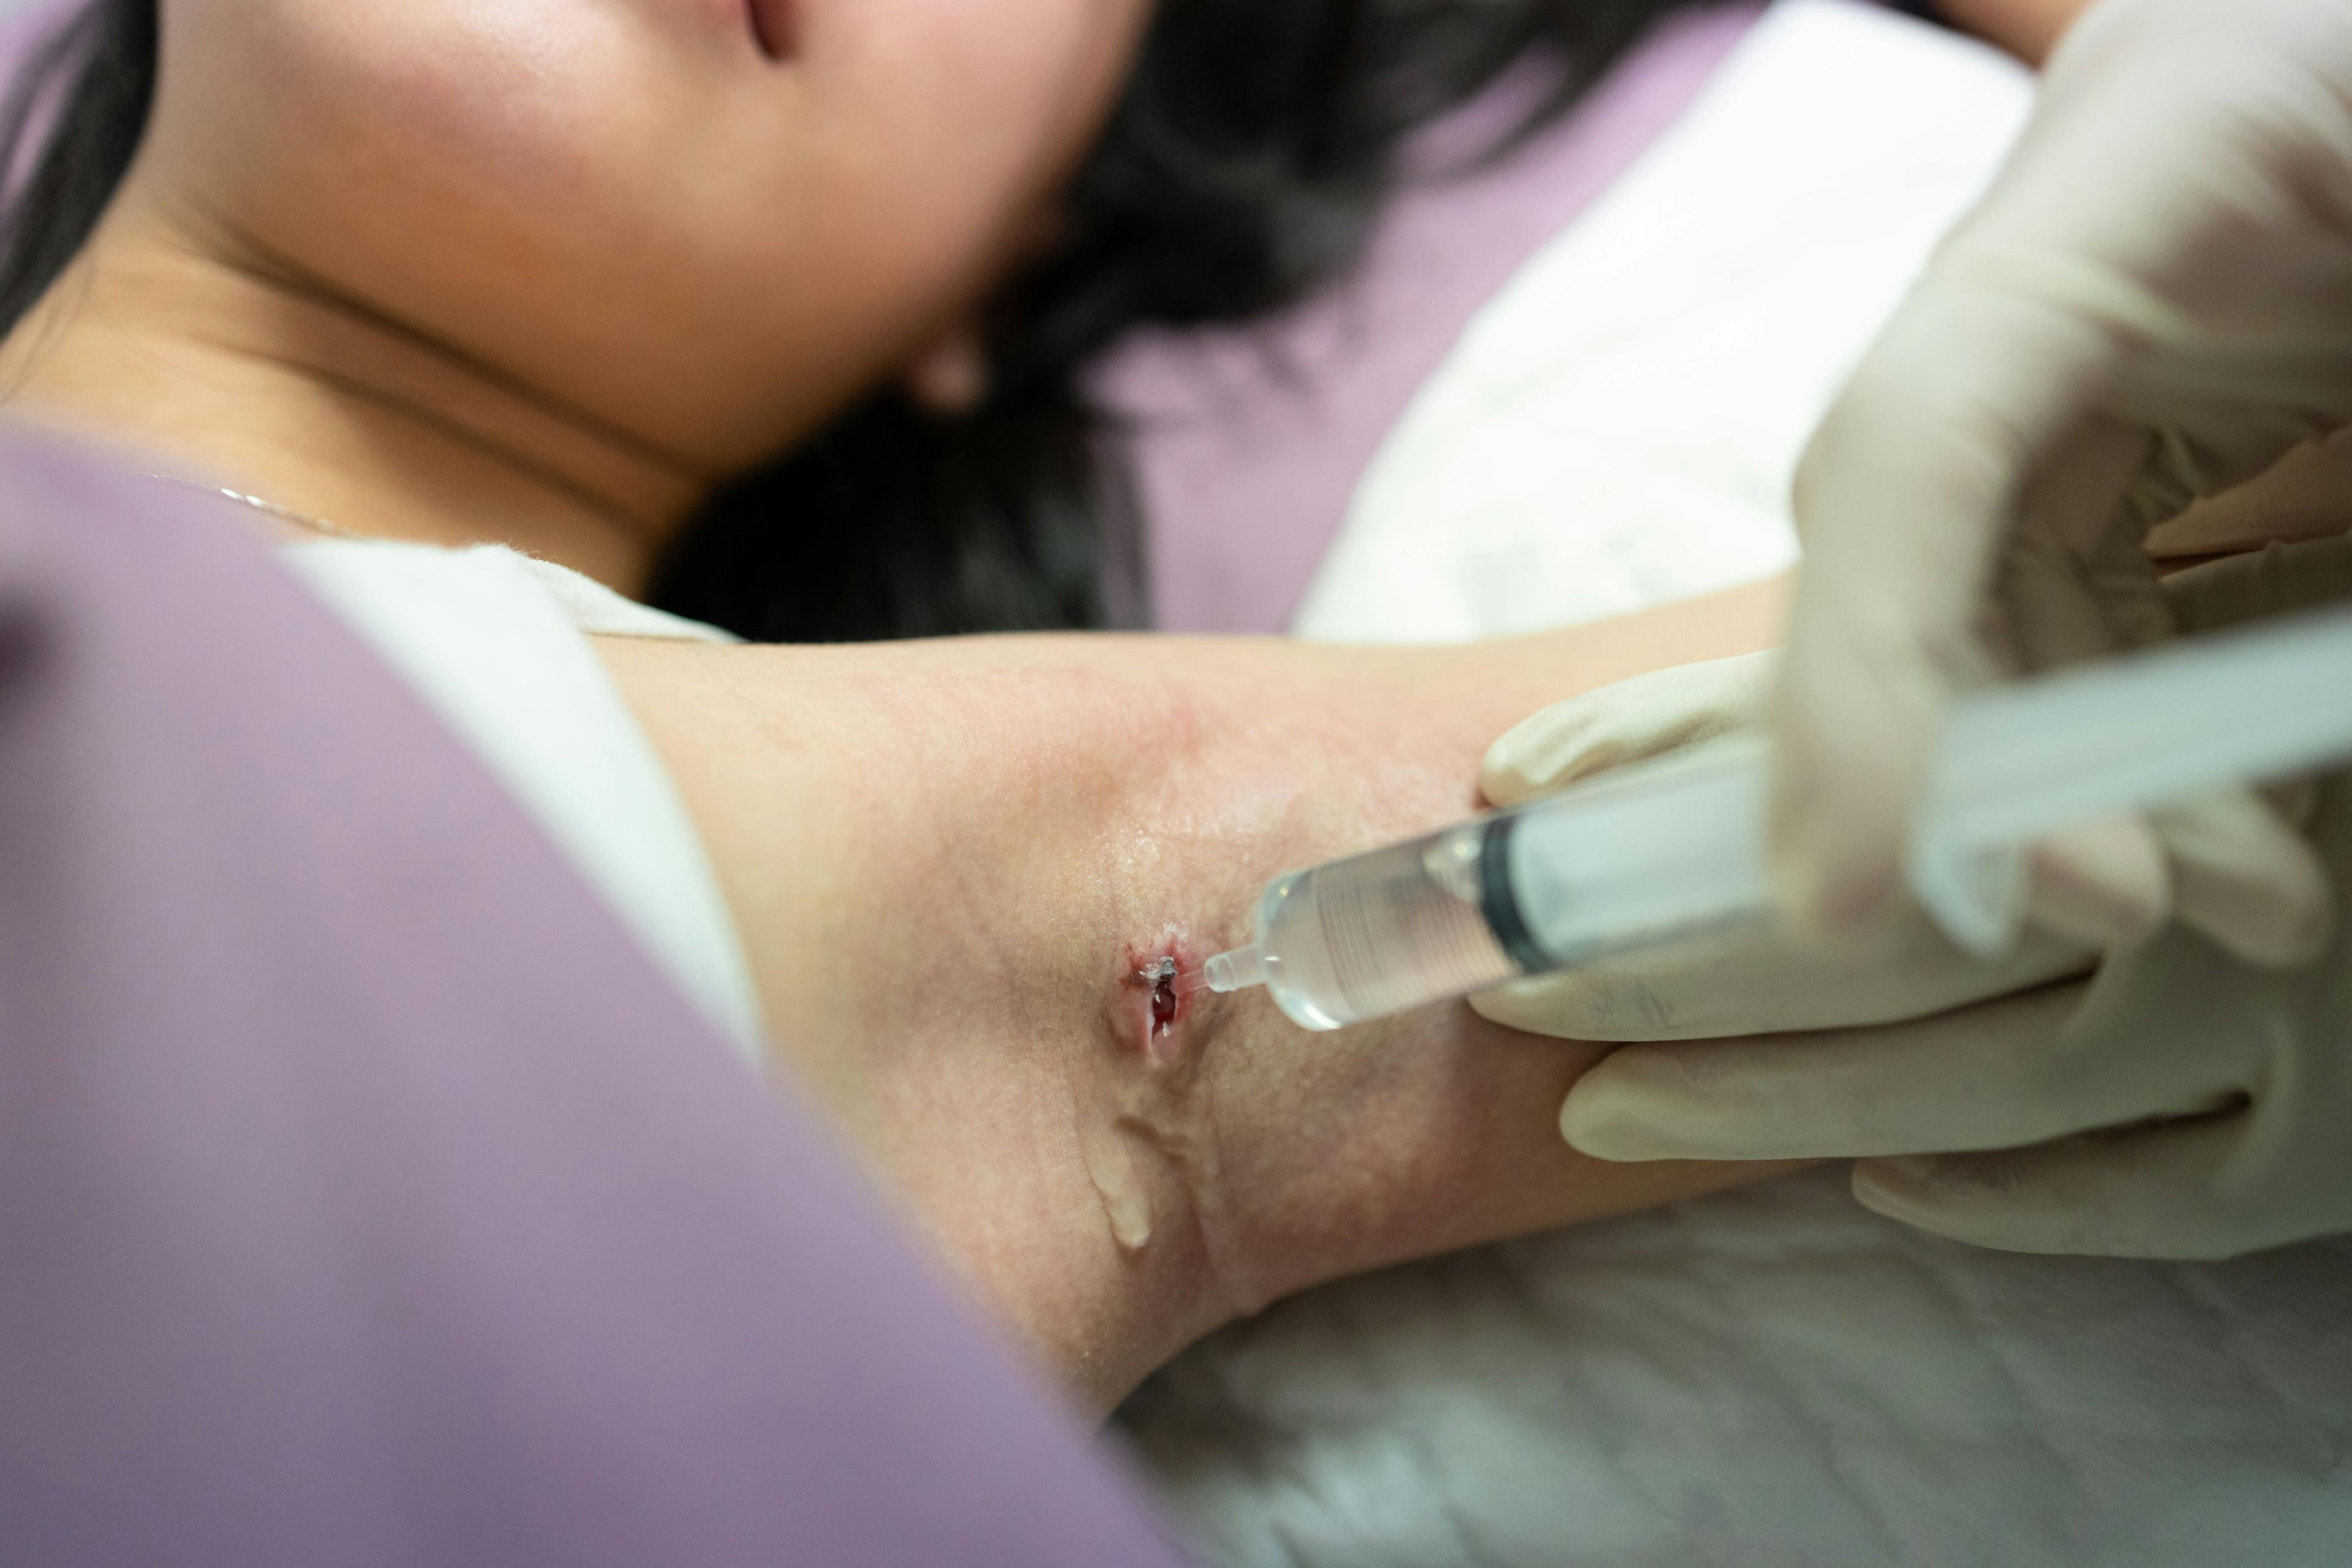 Rapid HS Pearls: Drug Data and Wound Care